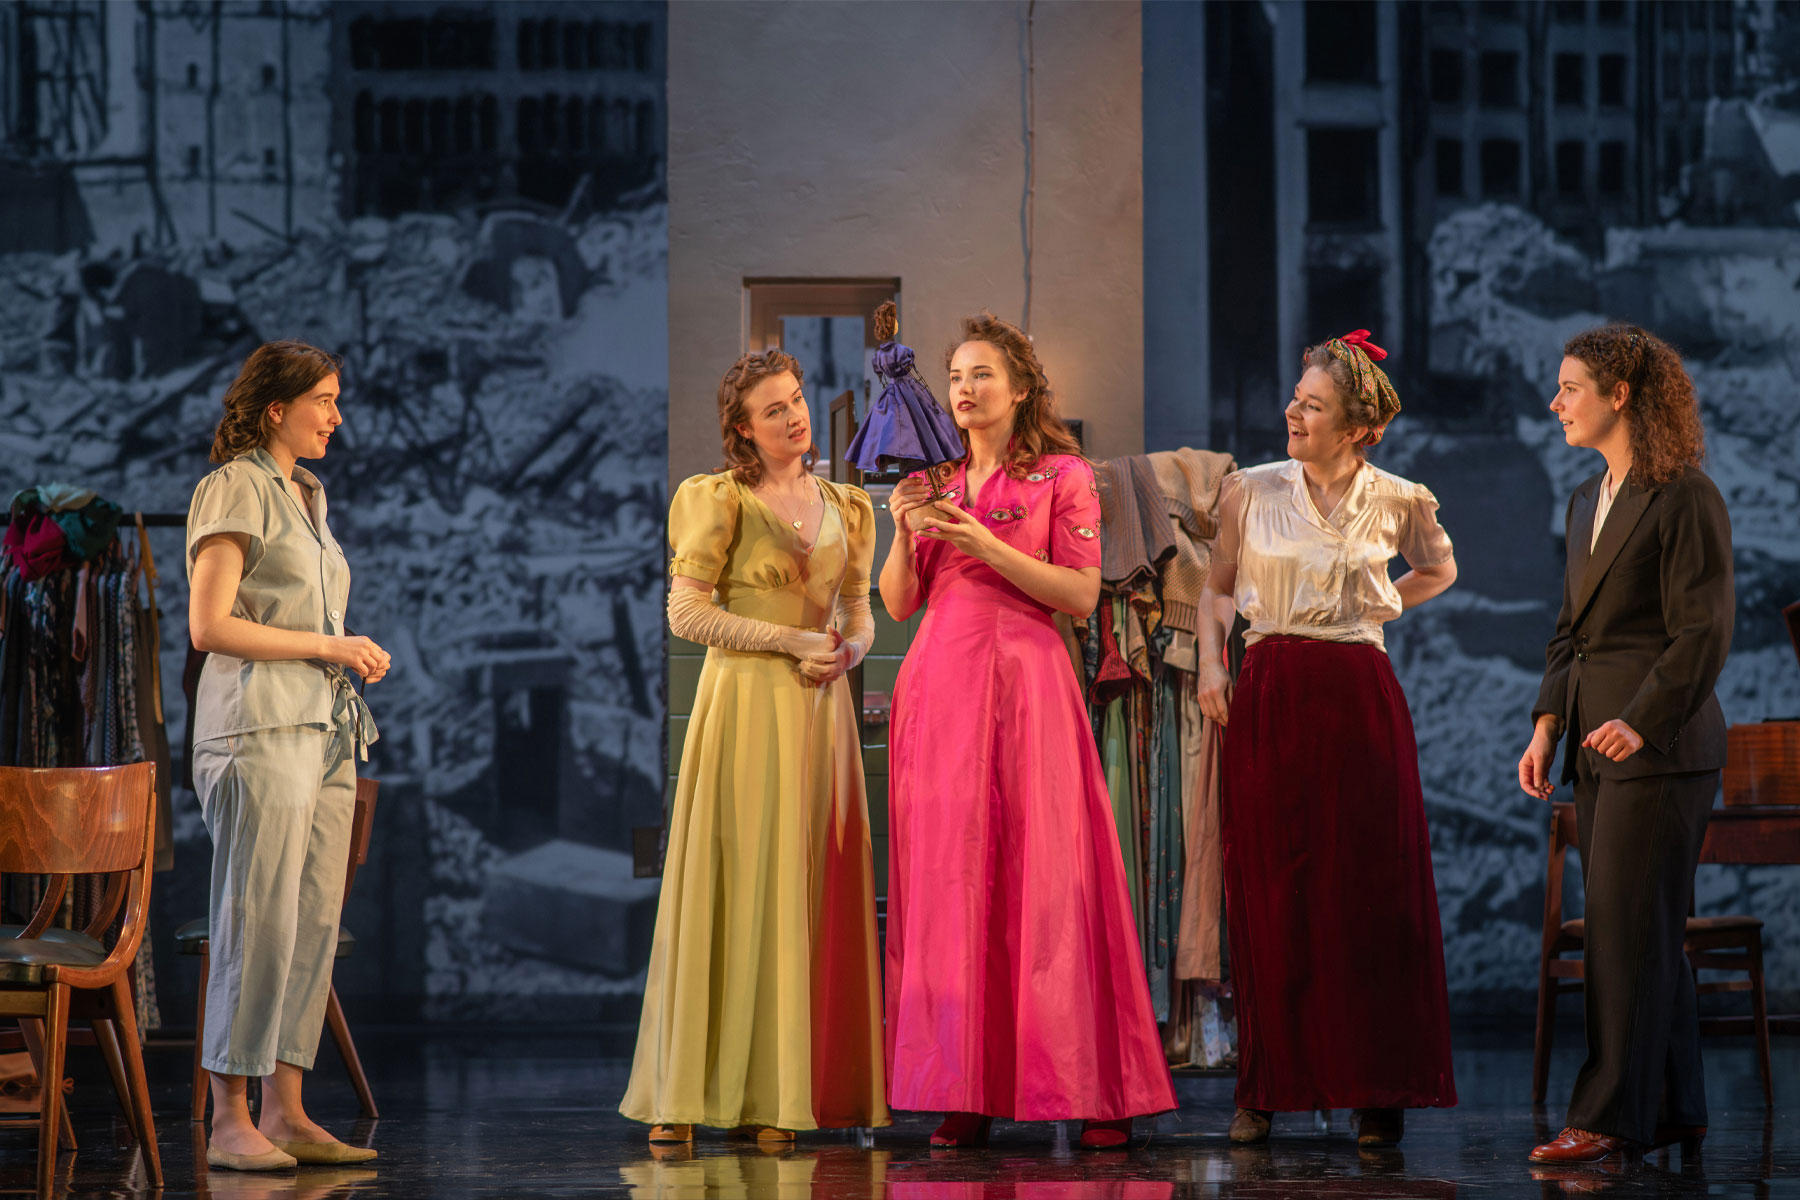 Molly McGrath, Shannon Watson, Julia Brown, Amy Kennedy and Molly Vevers in a scene from The Girls of Slender Means at the Royal Lyceum Theatre